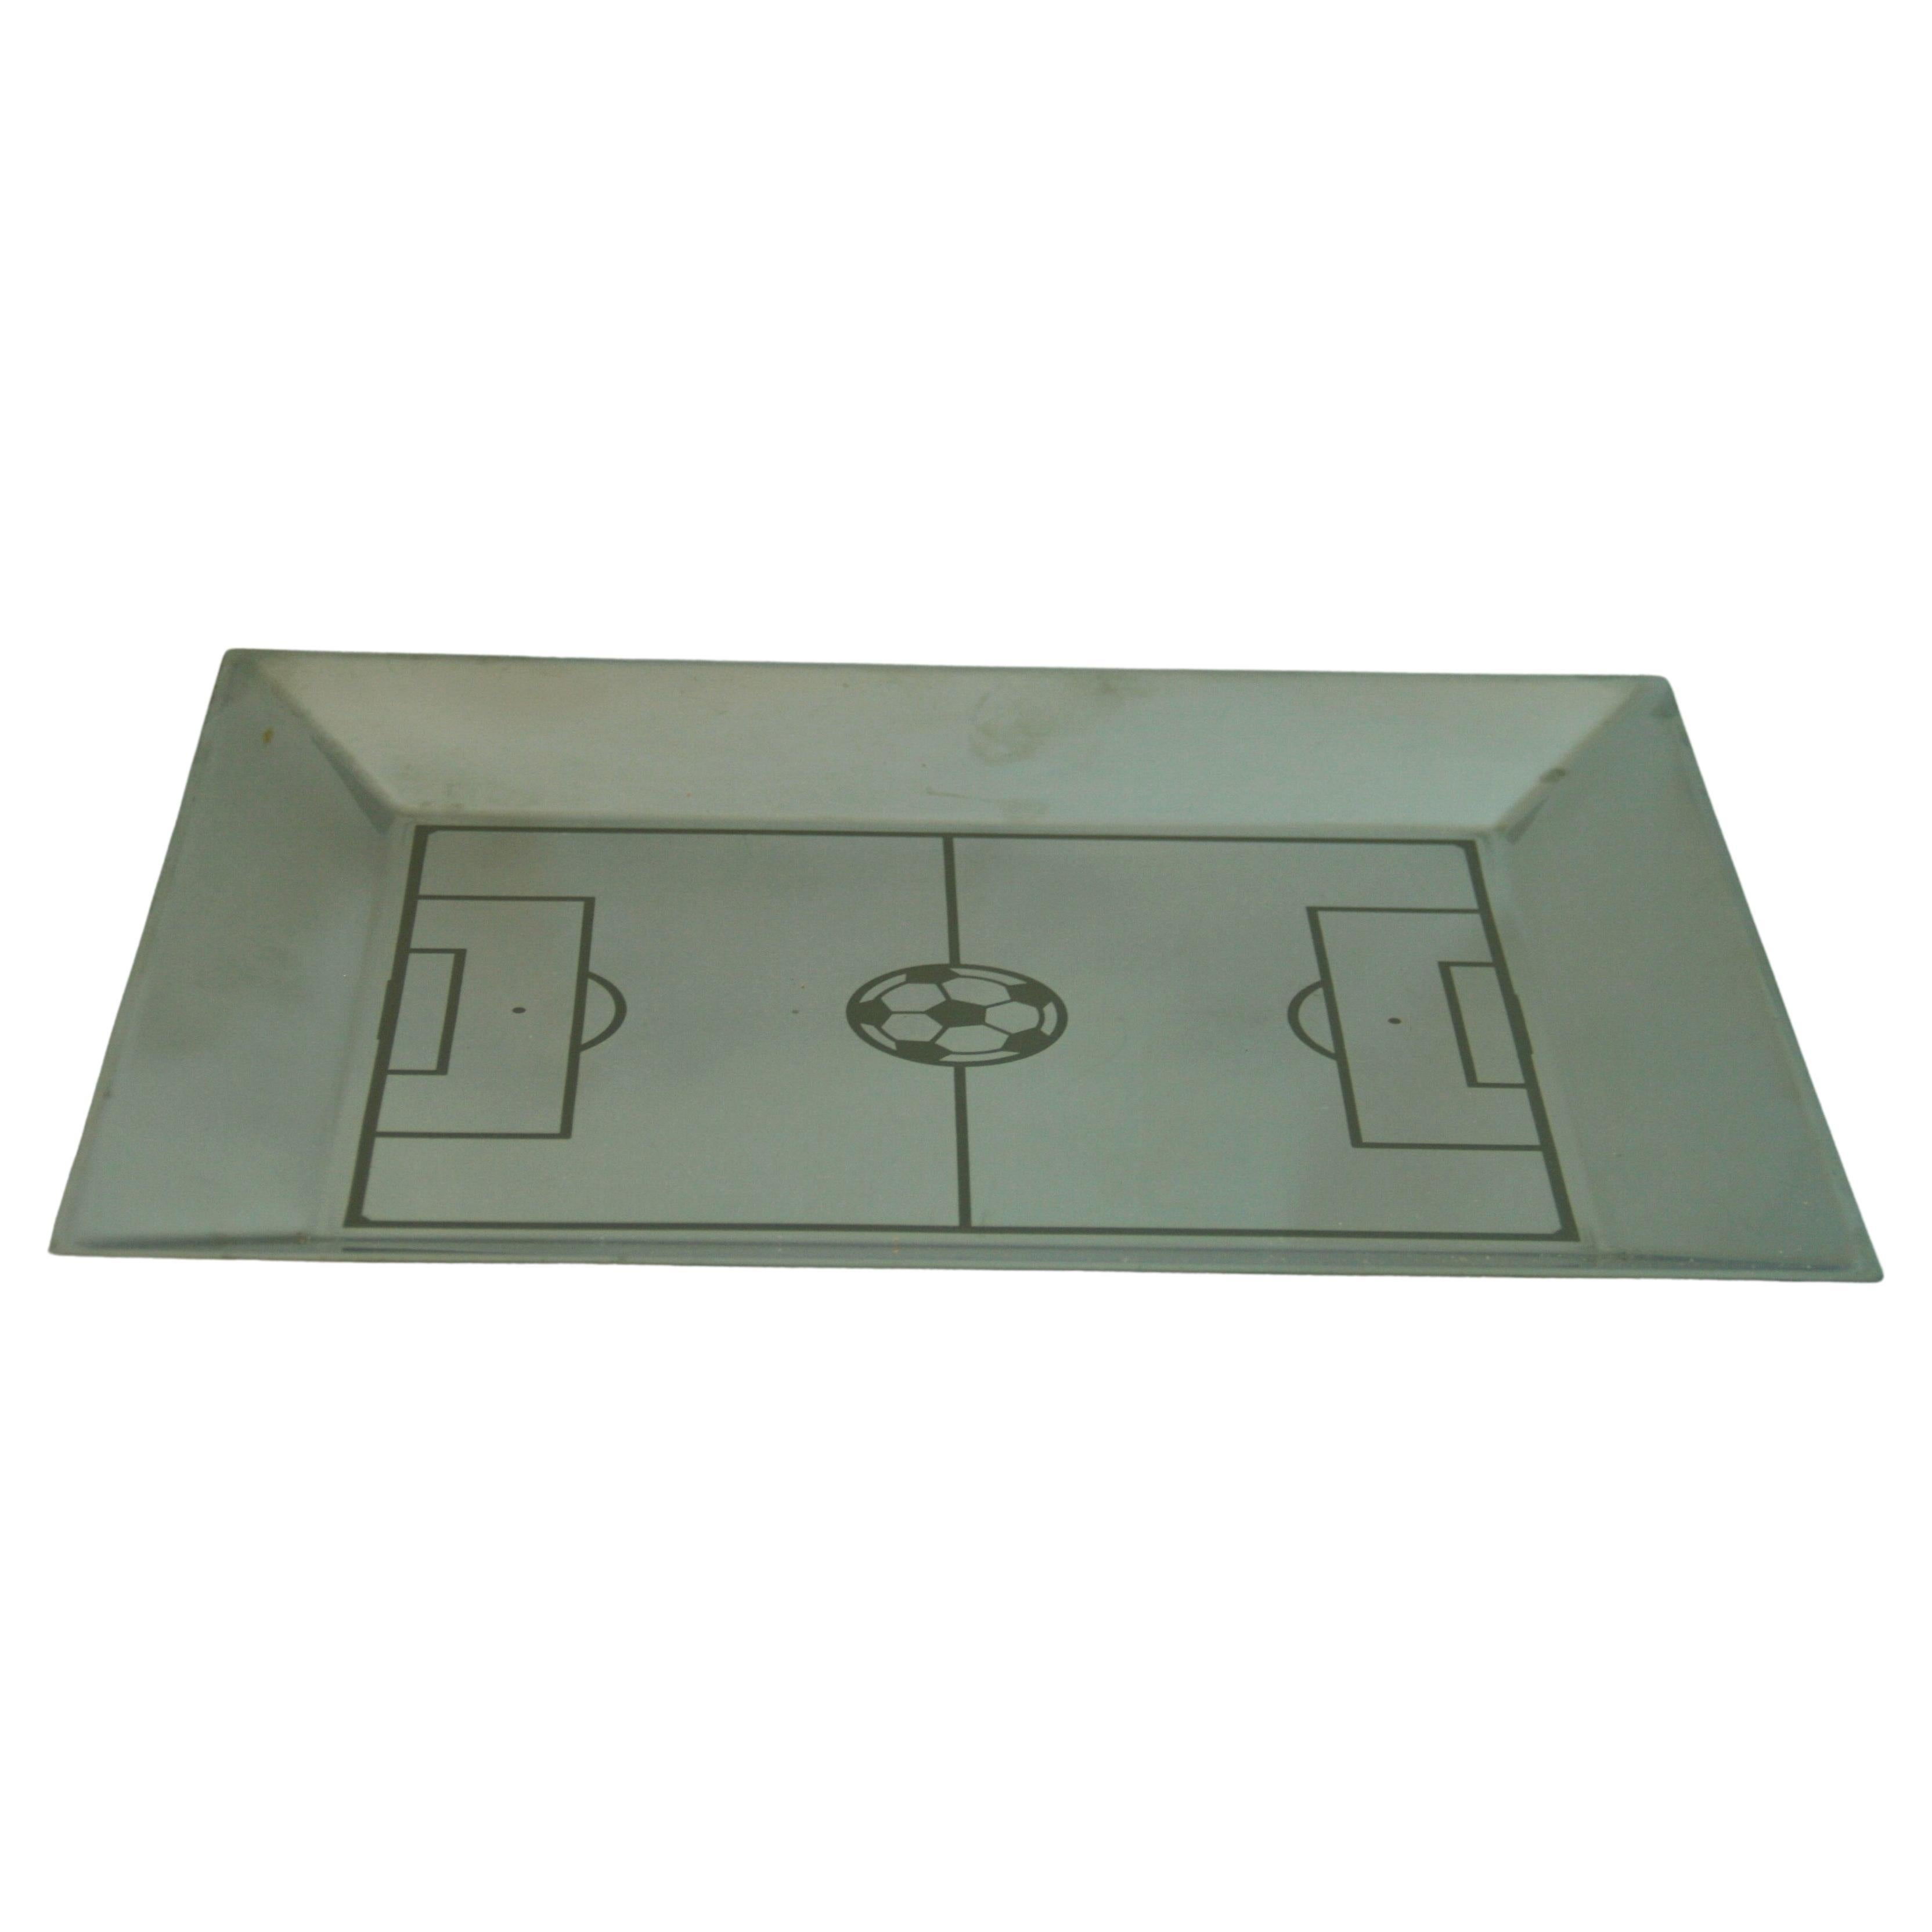 1447 German stainless steel tray